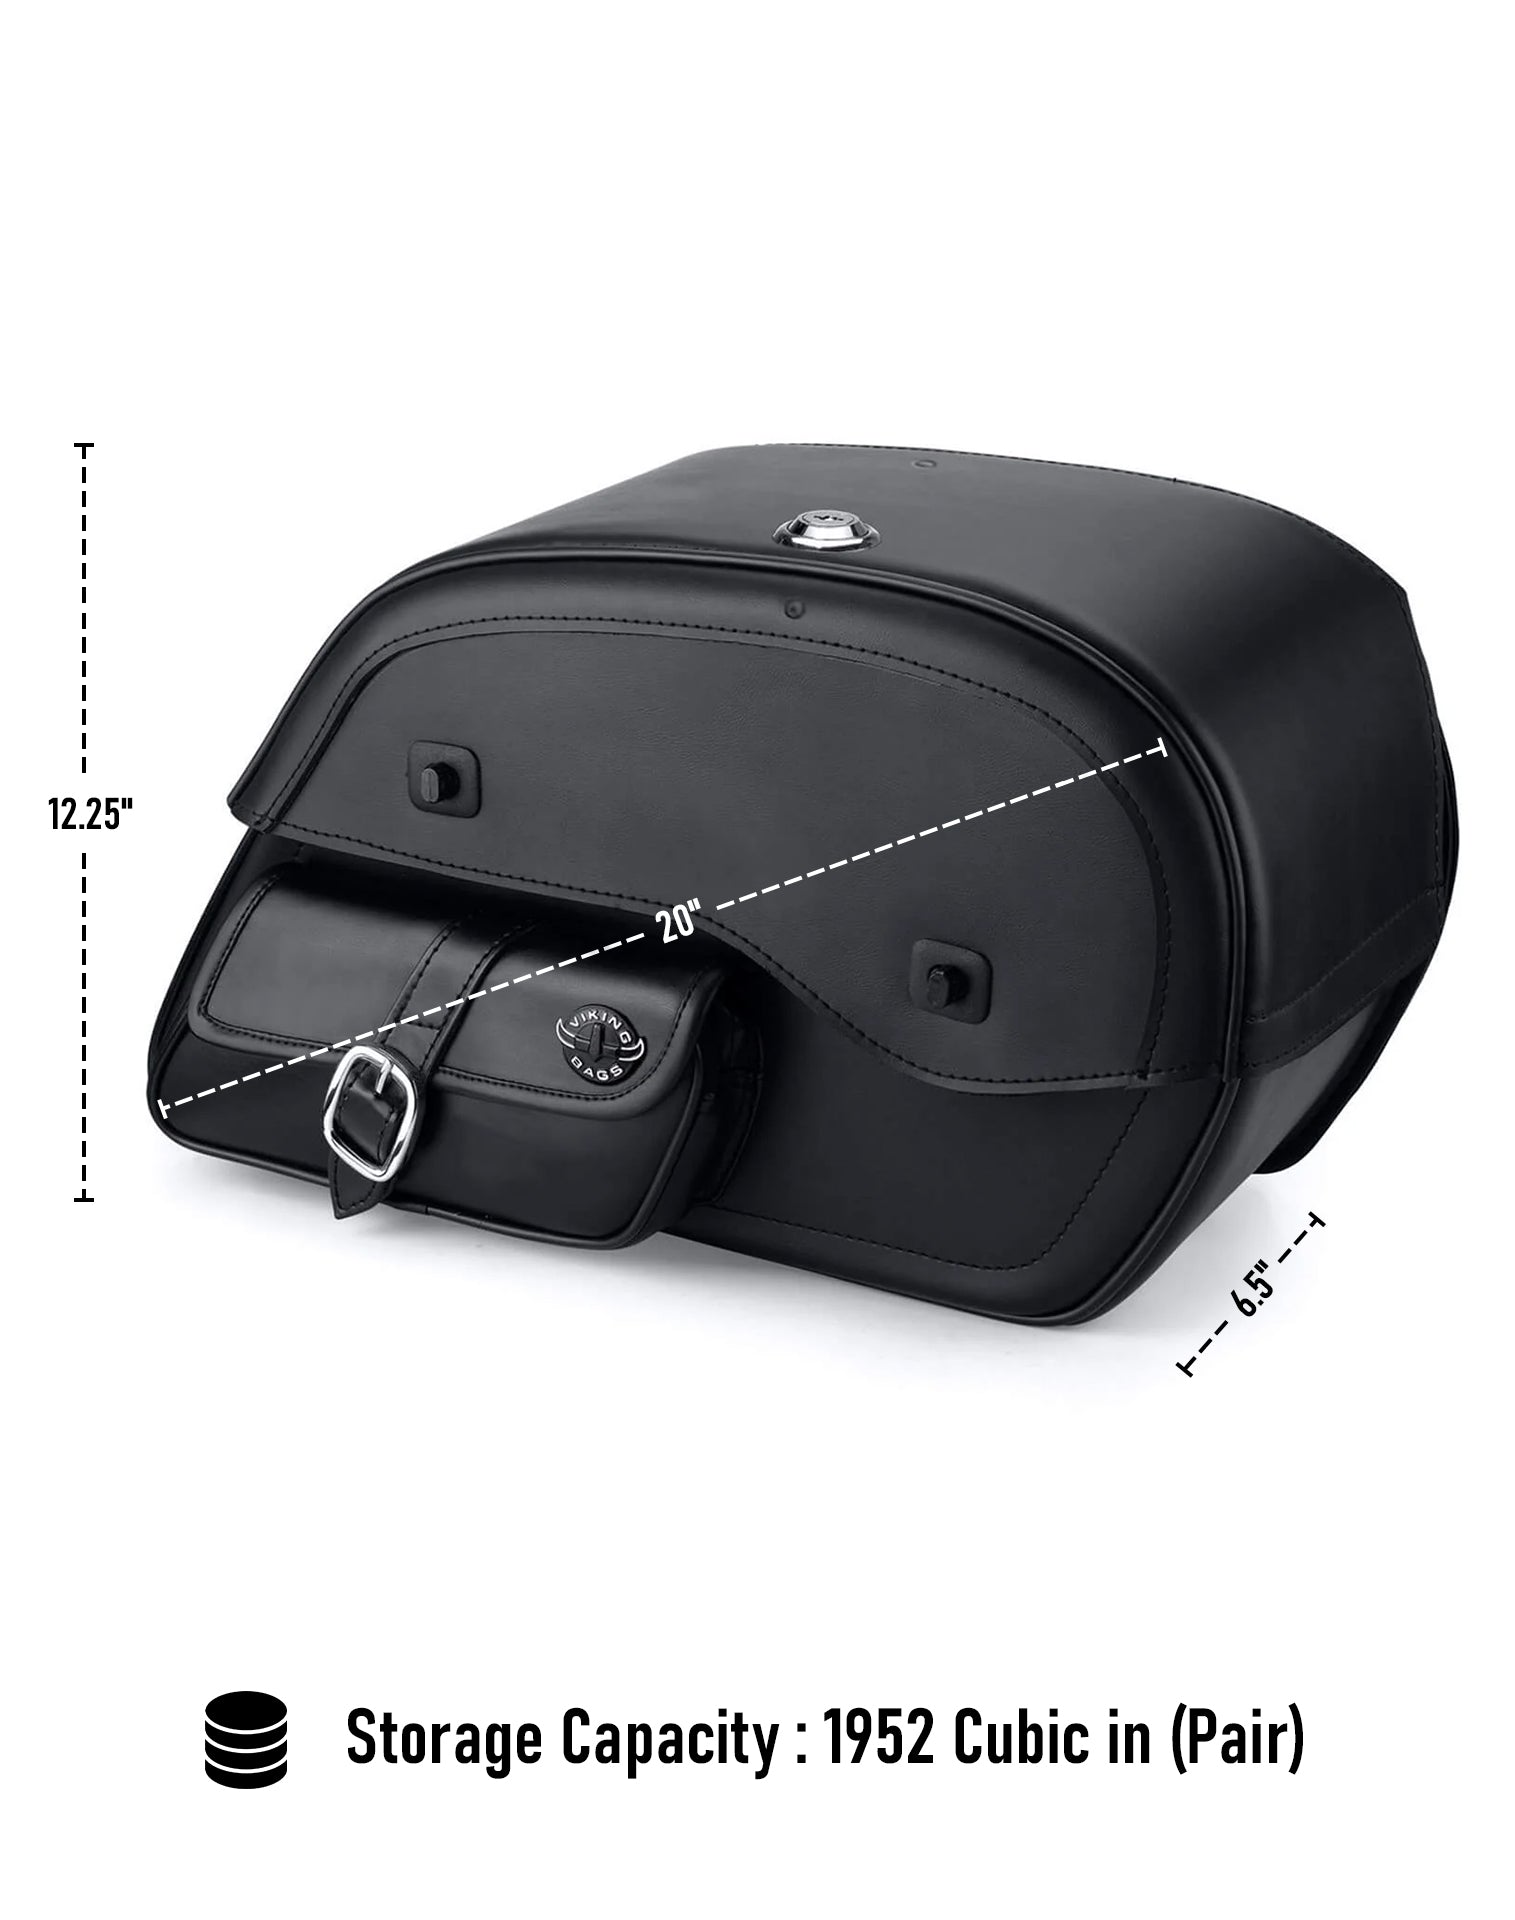 Viking Essential Side Pocket Large Suzuki Boulevard M50 Vz800 Leather Motorcycle Saddlebags Can Store Your Ridings Gears